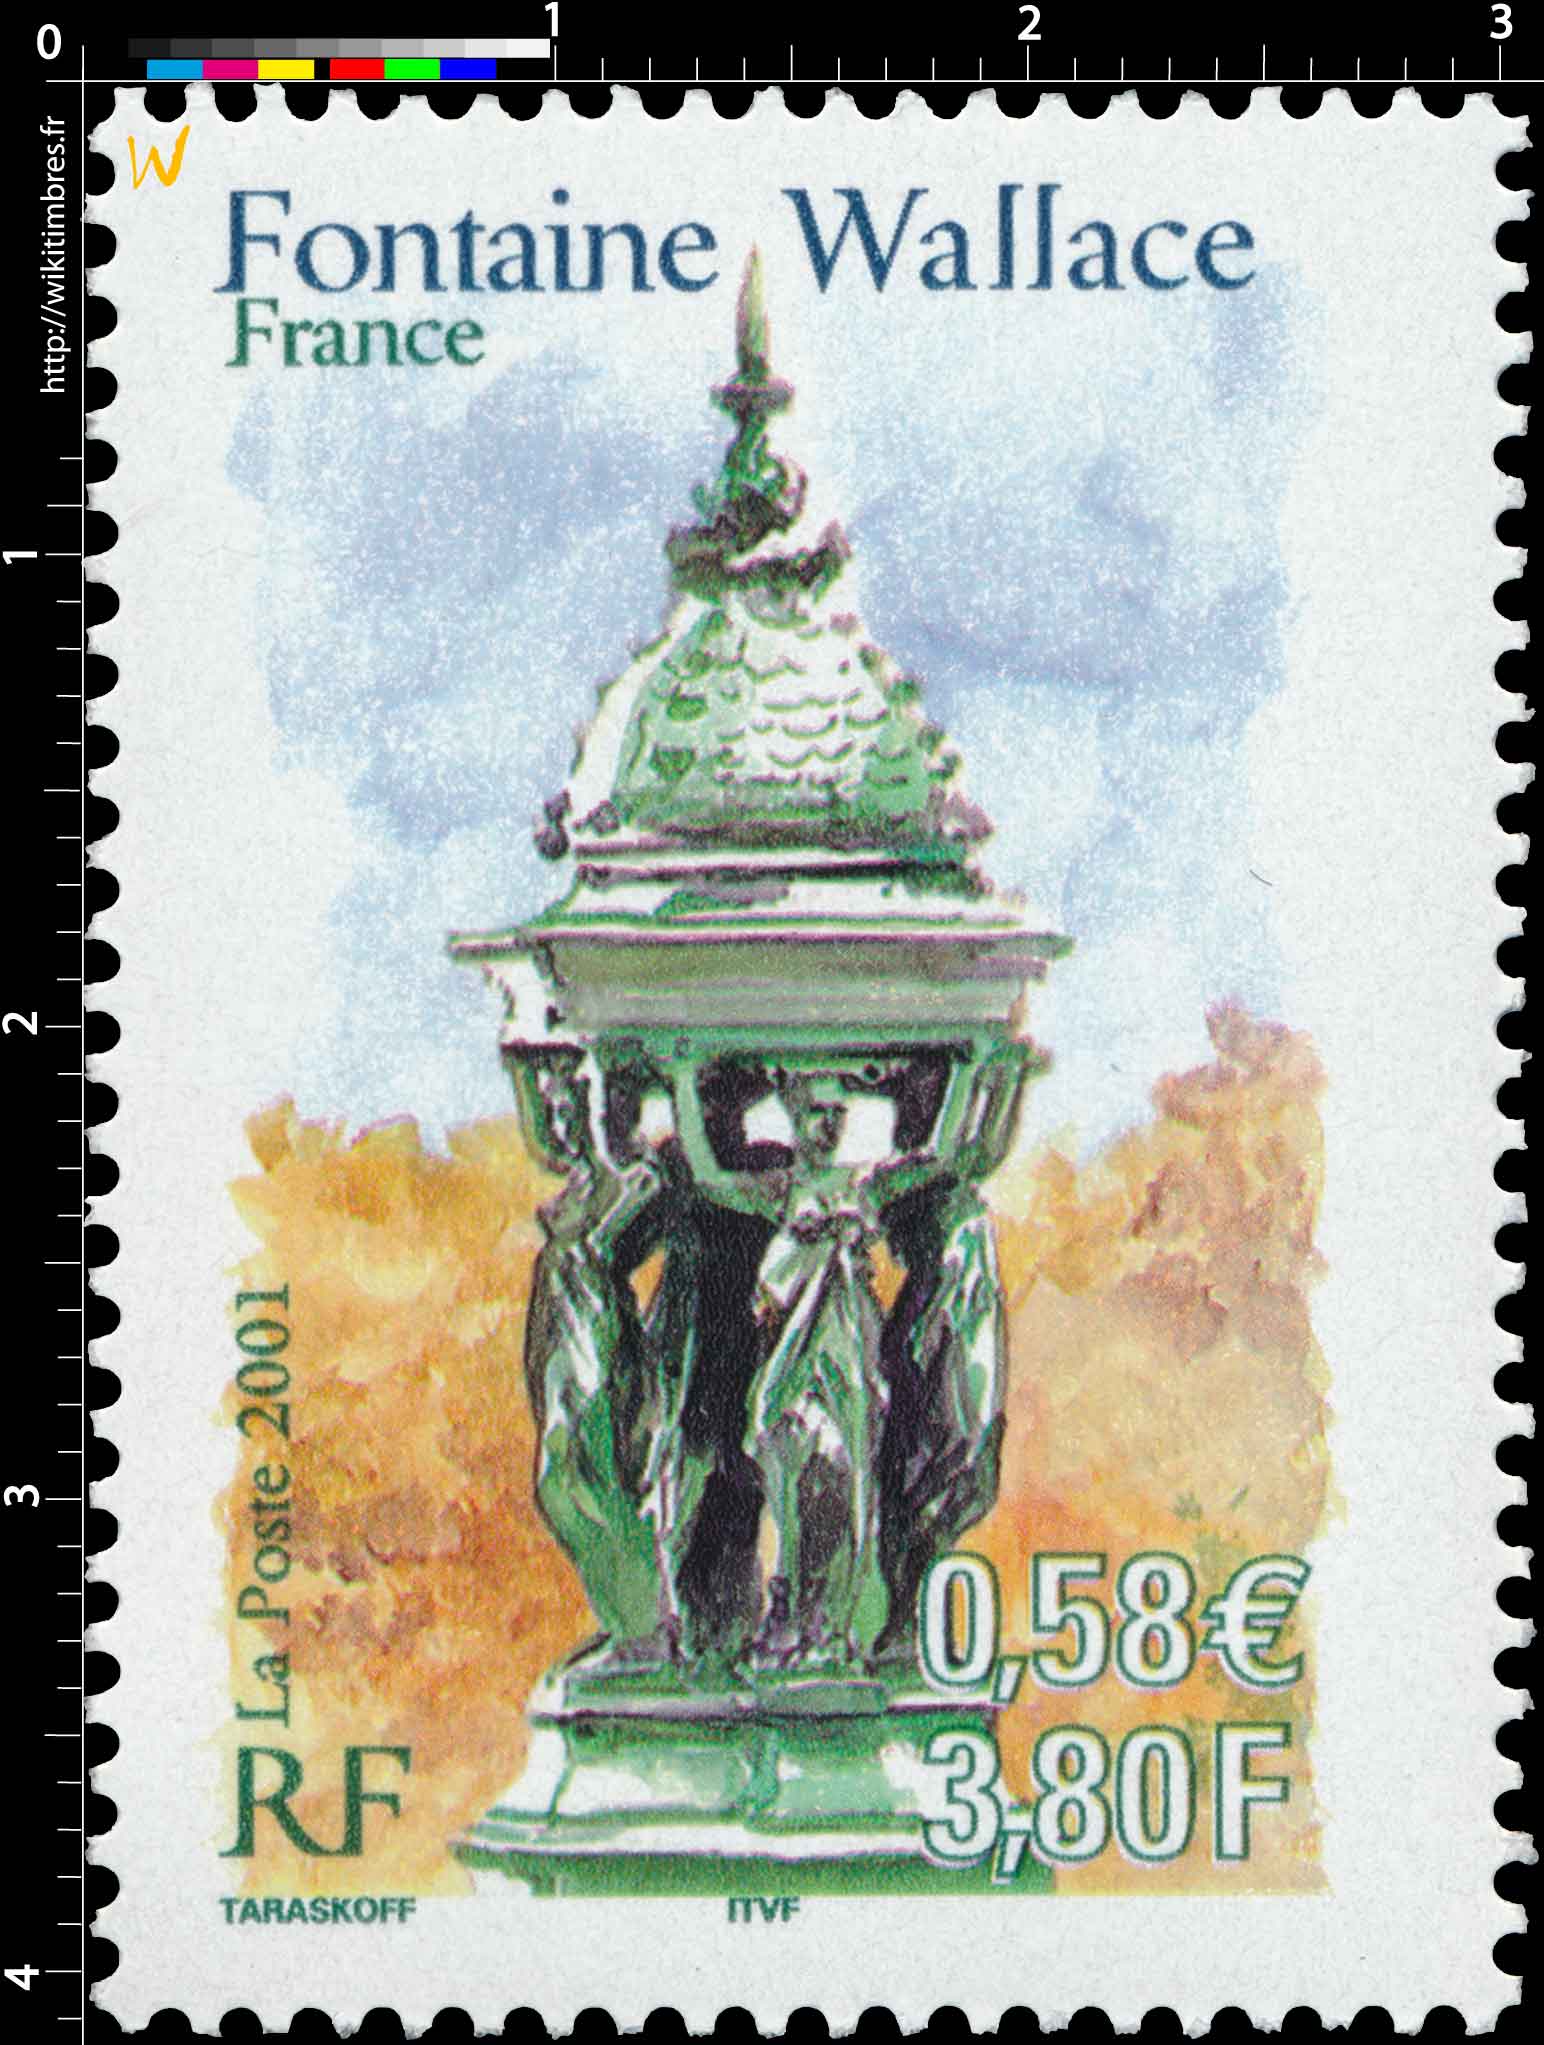 2001 Fontaine Wallace France